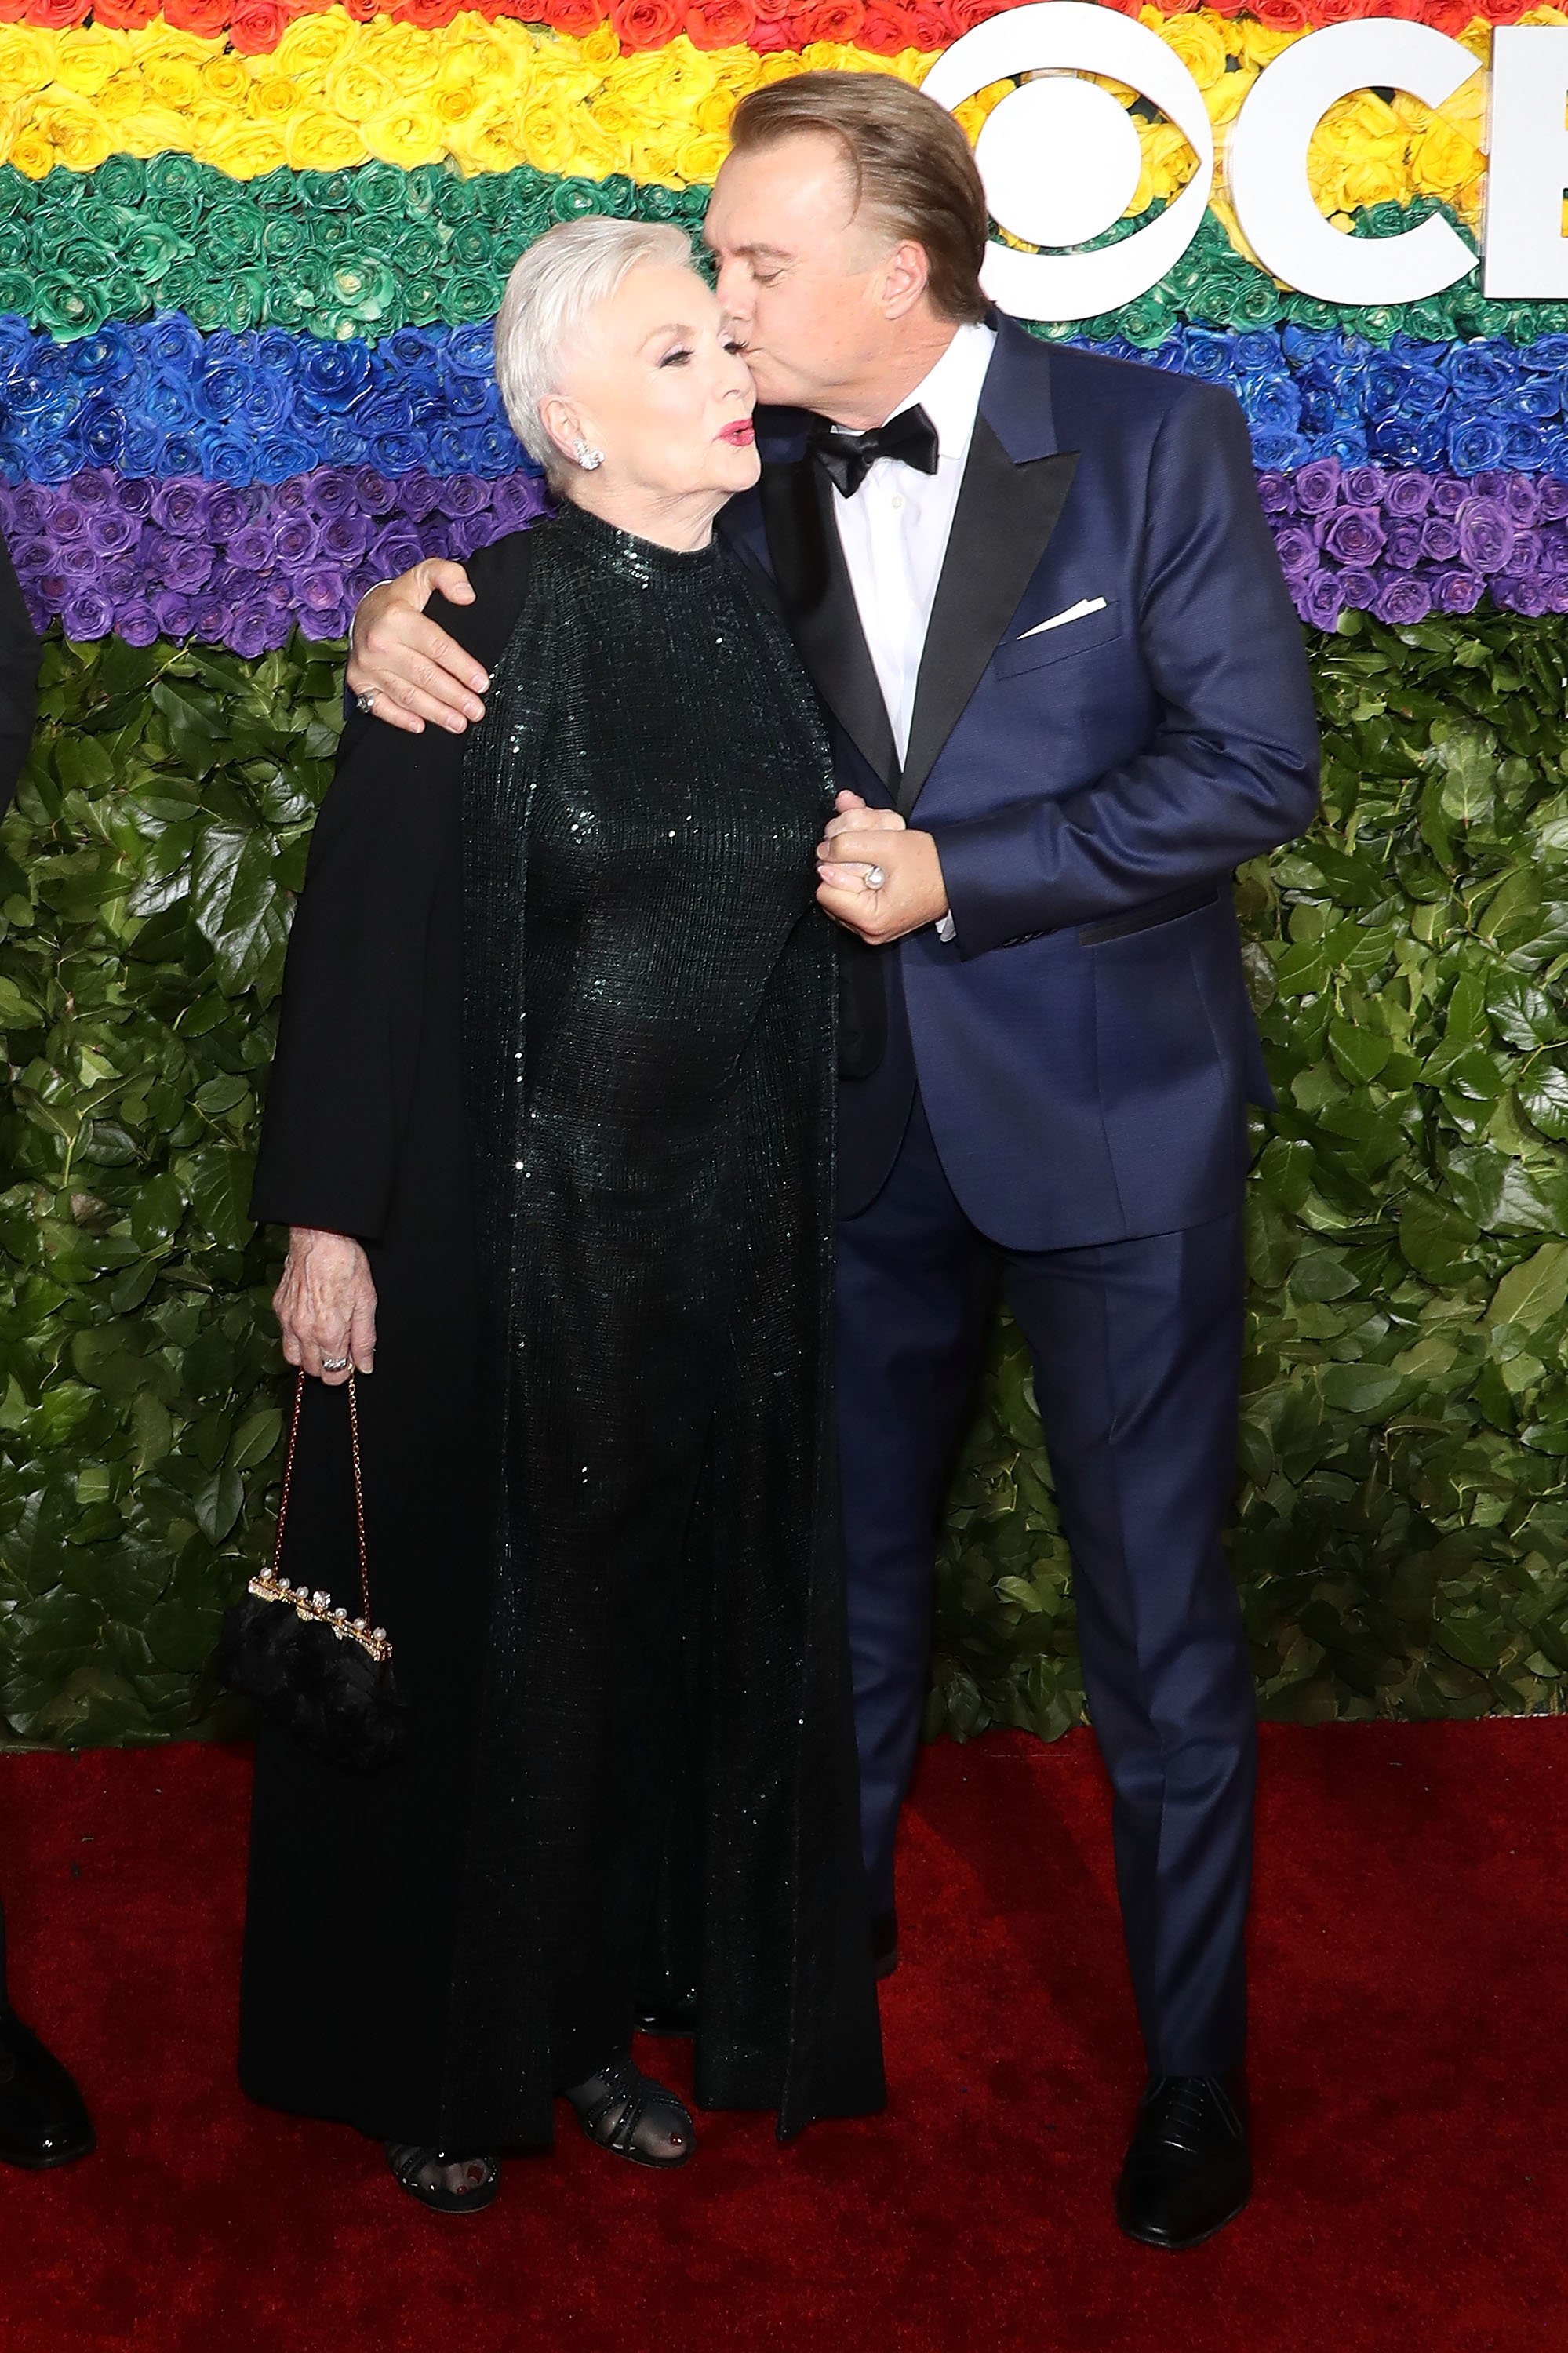 Shirley Jones and her son Shaun Cassidy attend the 2019 Tony Awards at Radio City Music Hall on June 9, 2019 in New York City. ┃Source: Getty Images